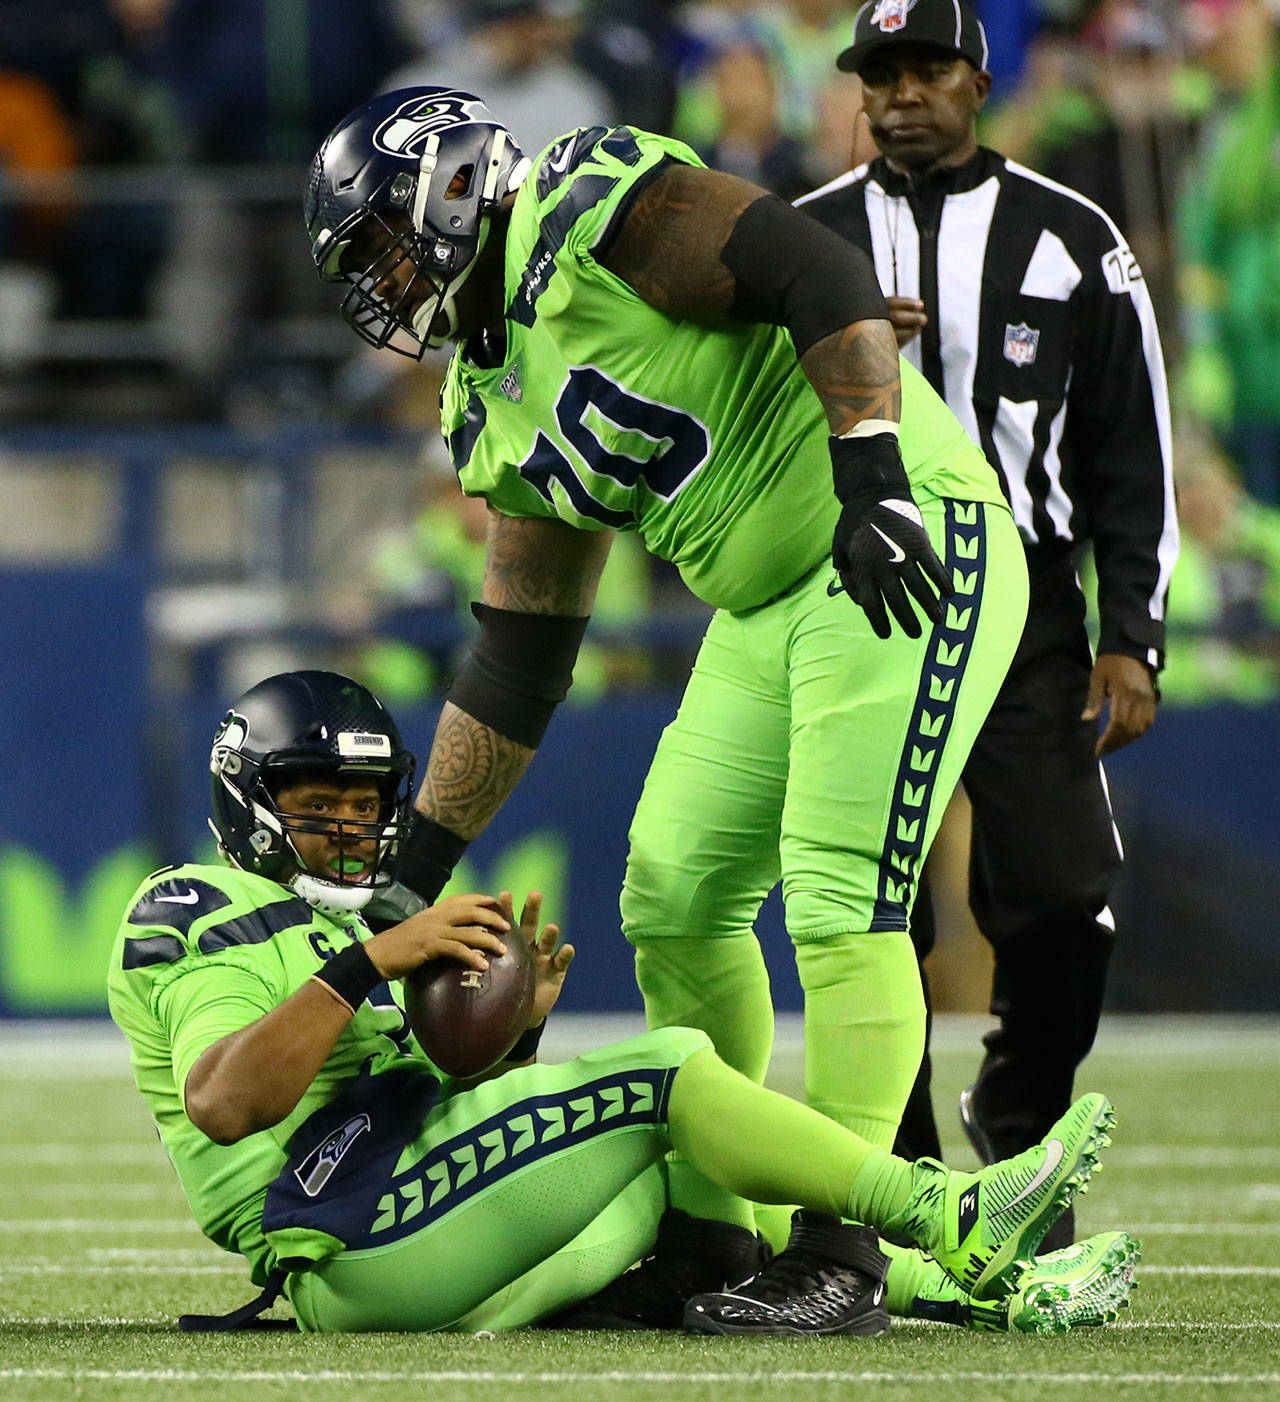 Seattle’s Mike Iupati helps Seahawks Russell Wilson to his feet after a tackle in the backfield during the Seahawks 30-29 win over the L.A. Rams on Thursday at CenturyLink Field in Seattle. (Kevin Clark / The Herald)